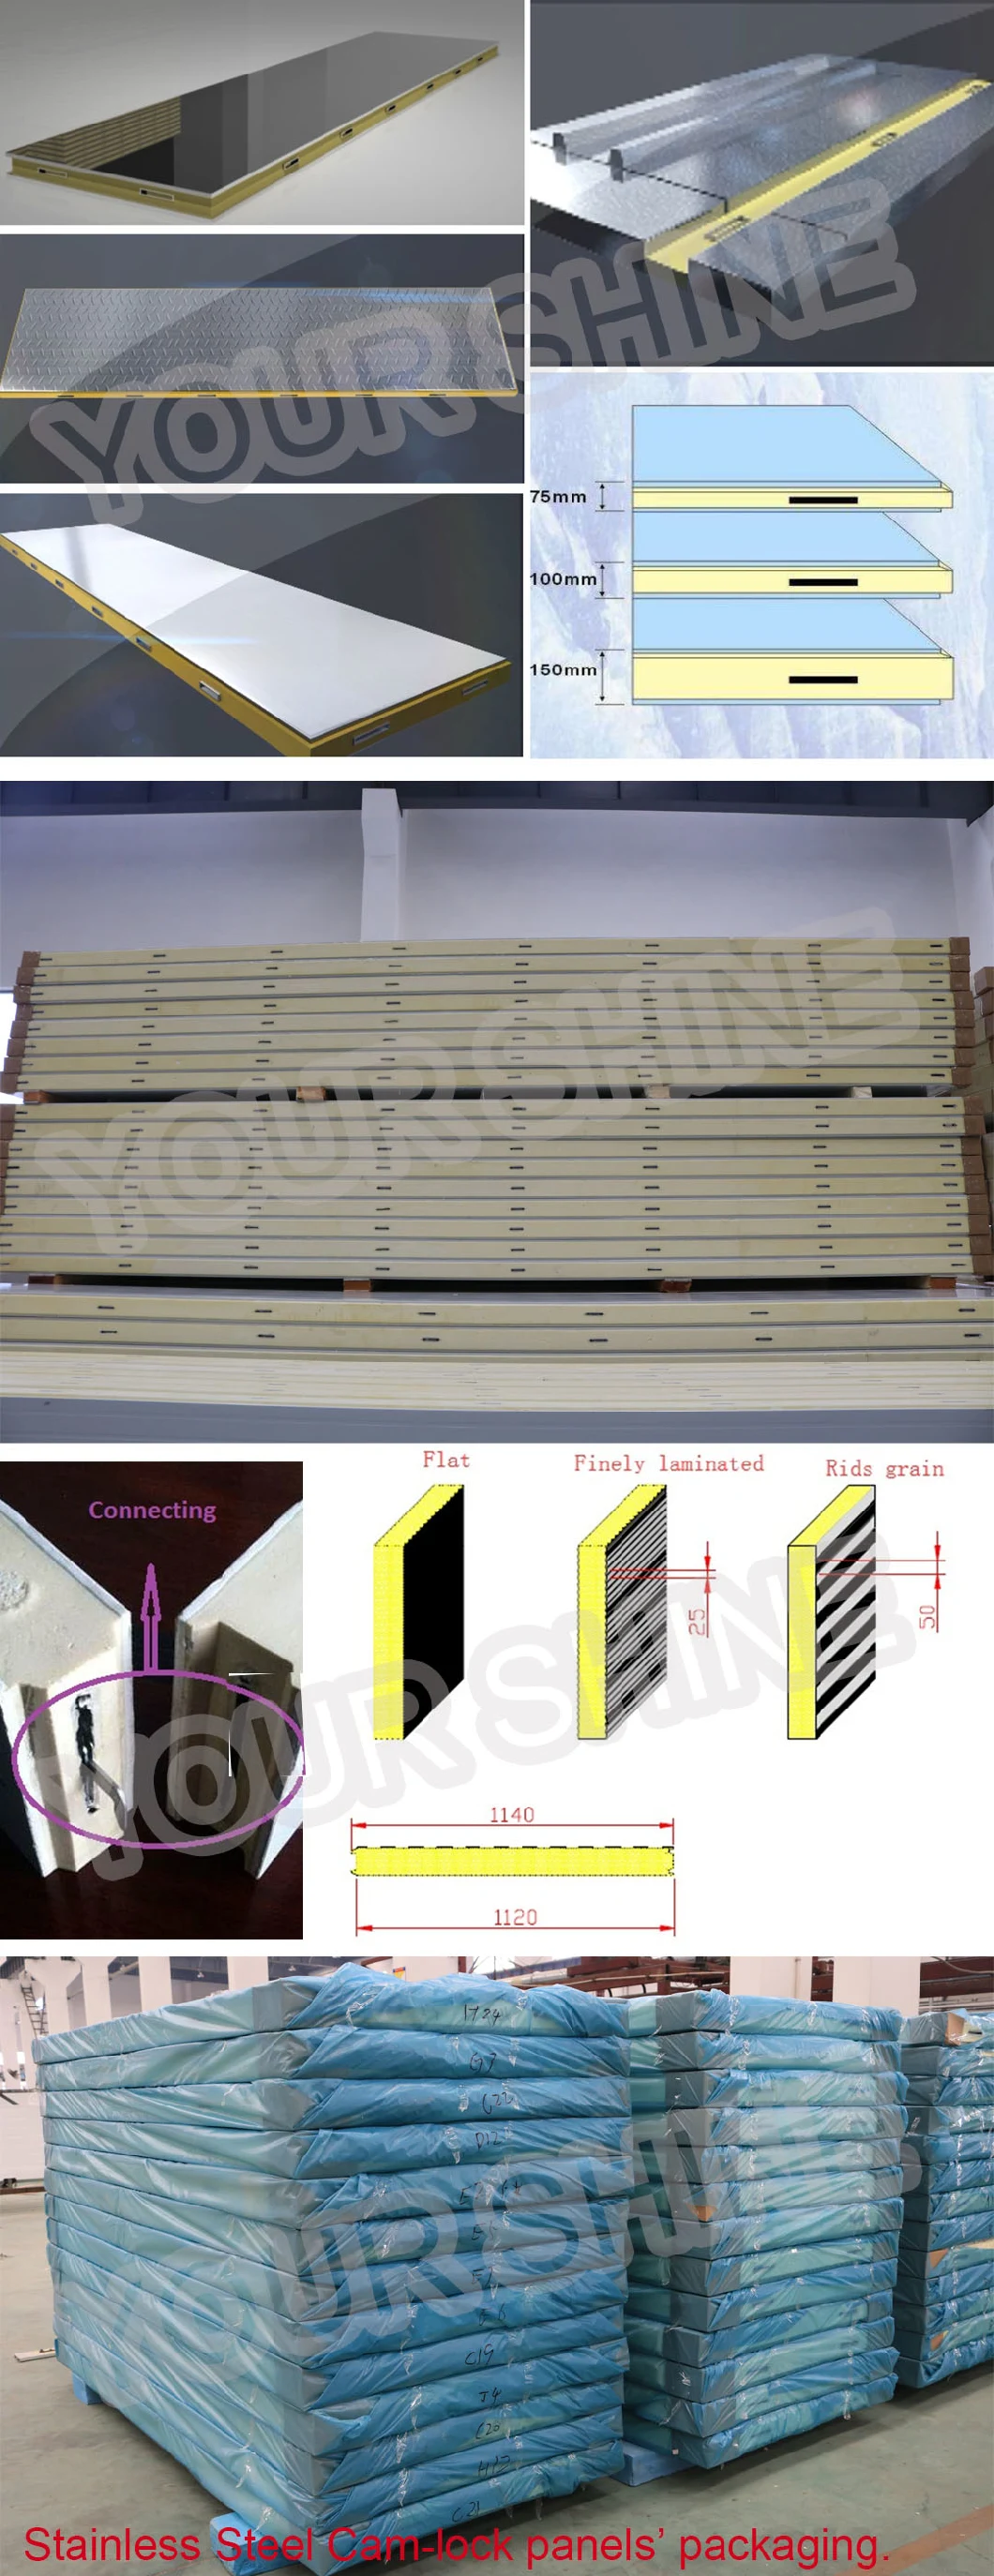 Fireproof Polyurethane Sandwiched Cold Room Panel for Ice Cube Maker